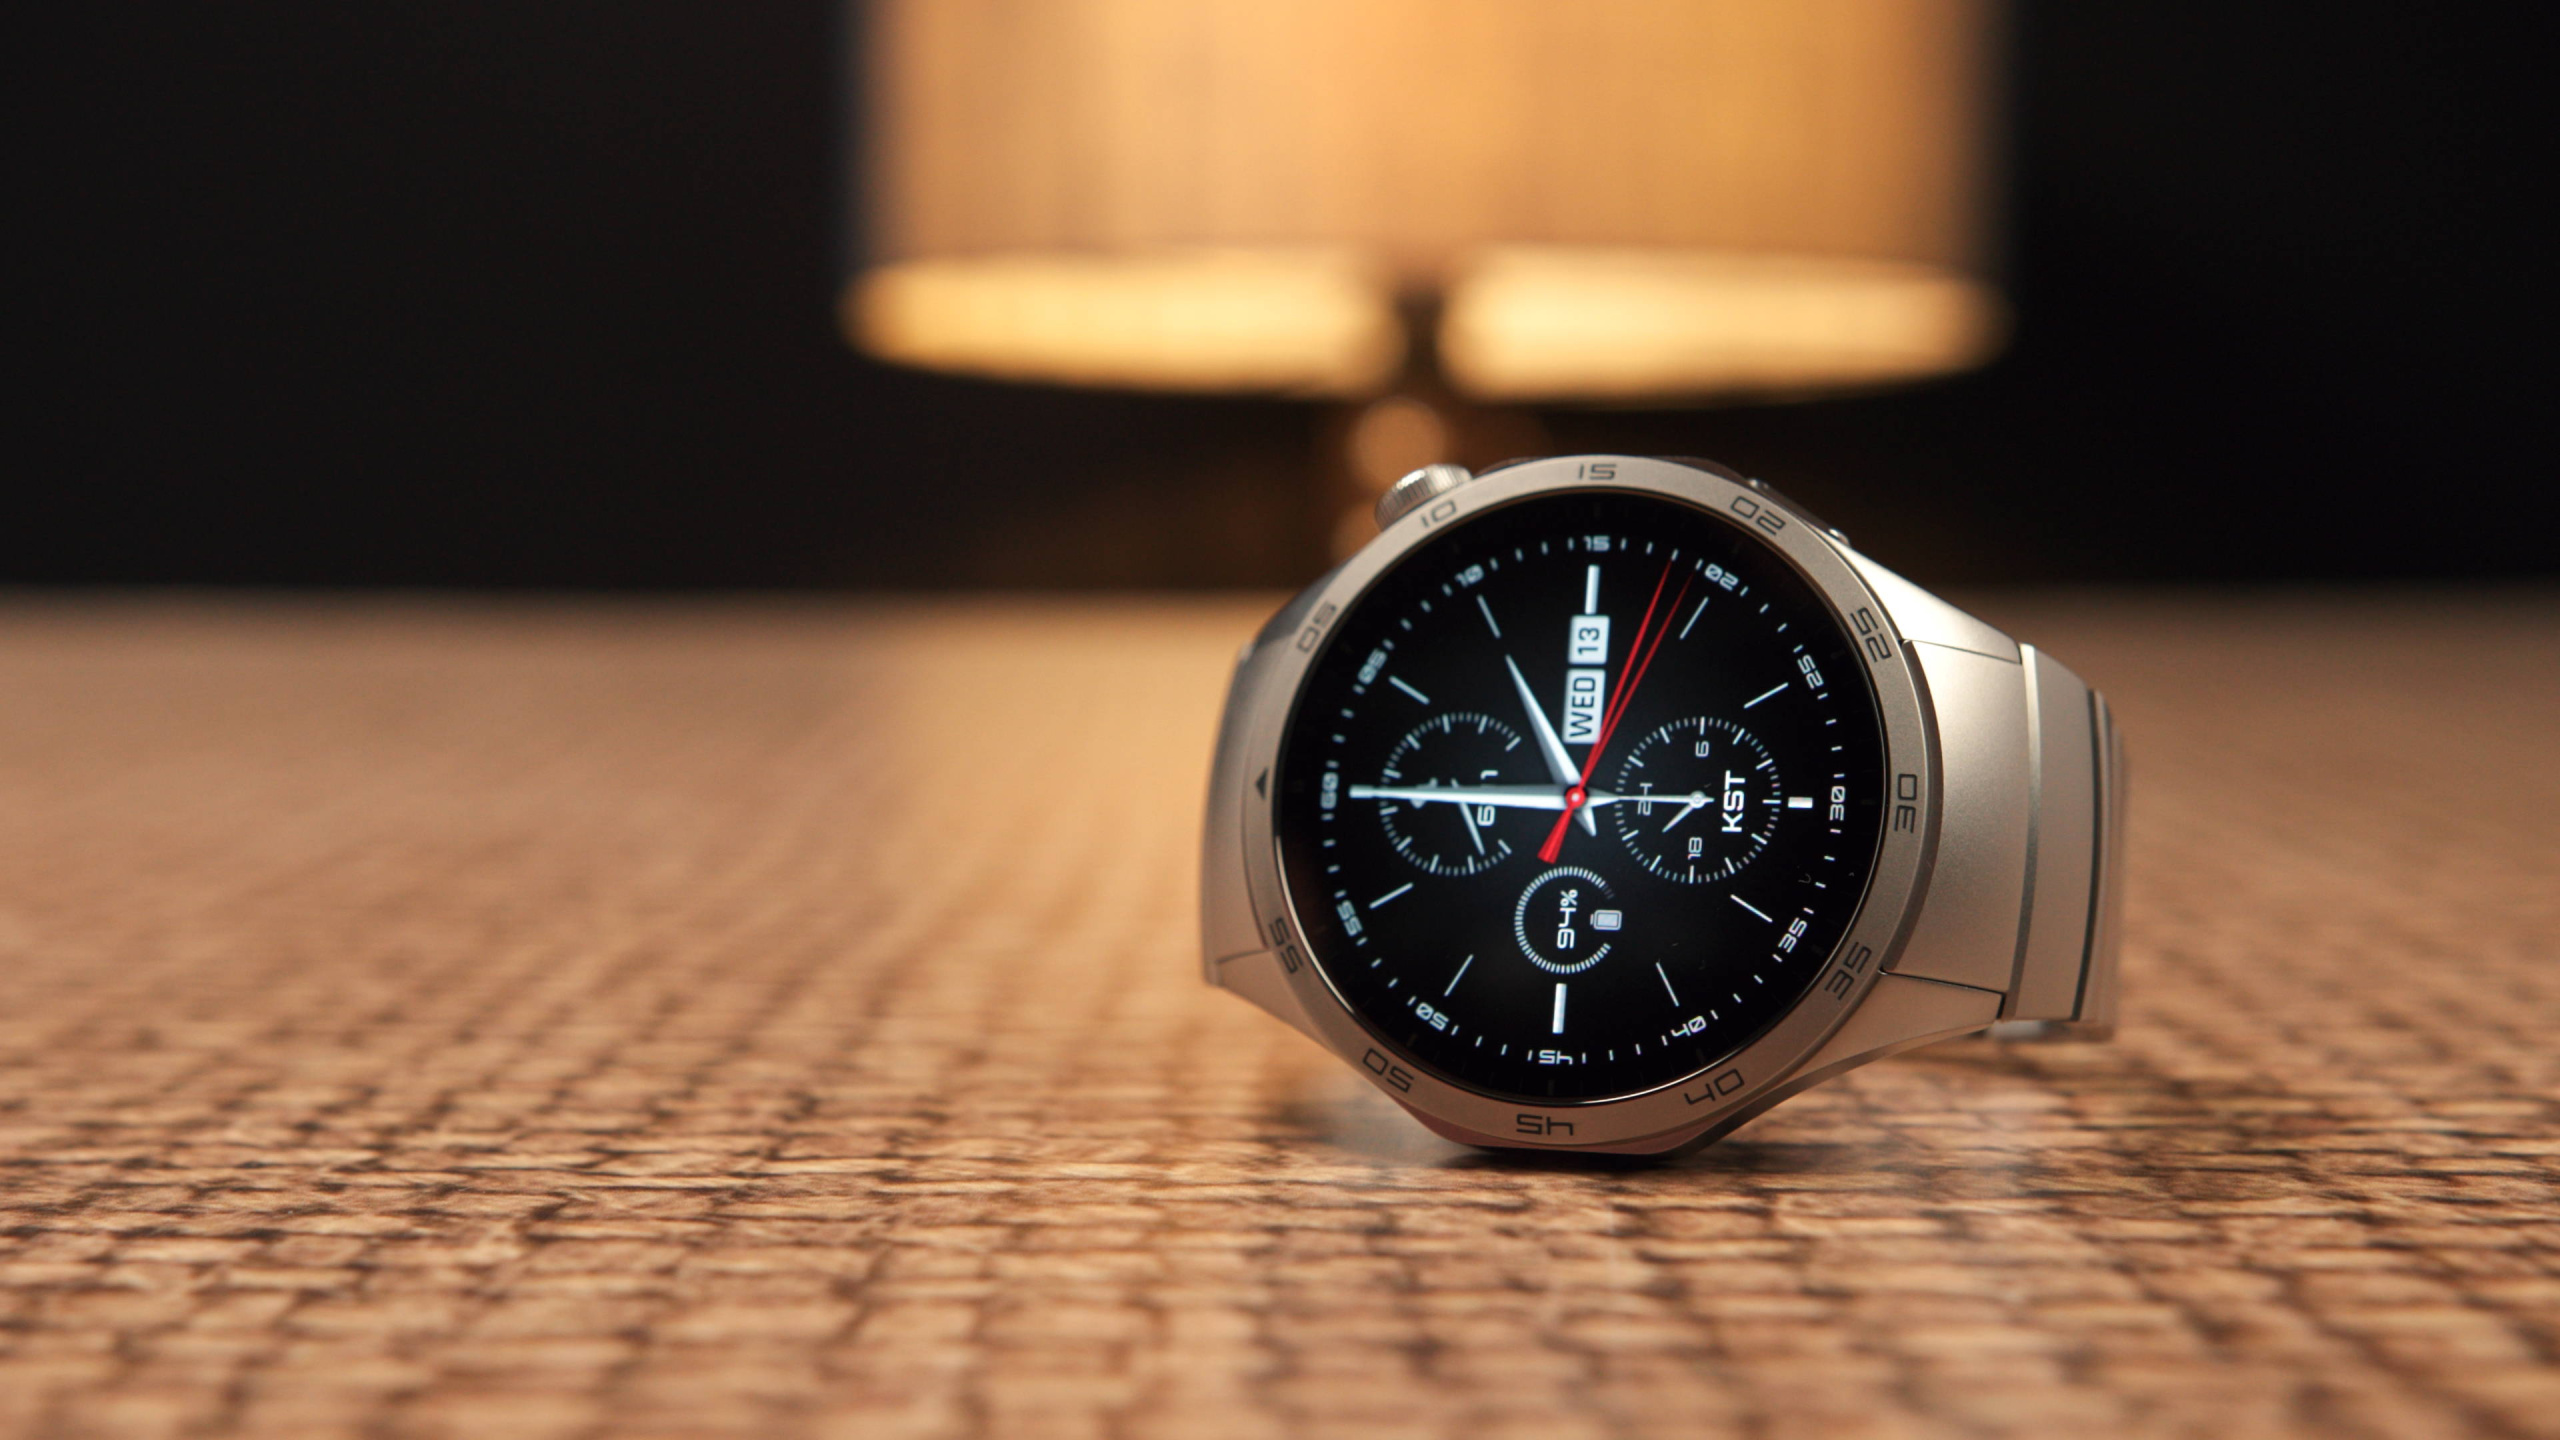 Huawei Watch GT 4 brings innovations for health and activity monitoring